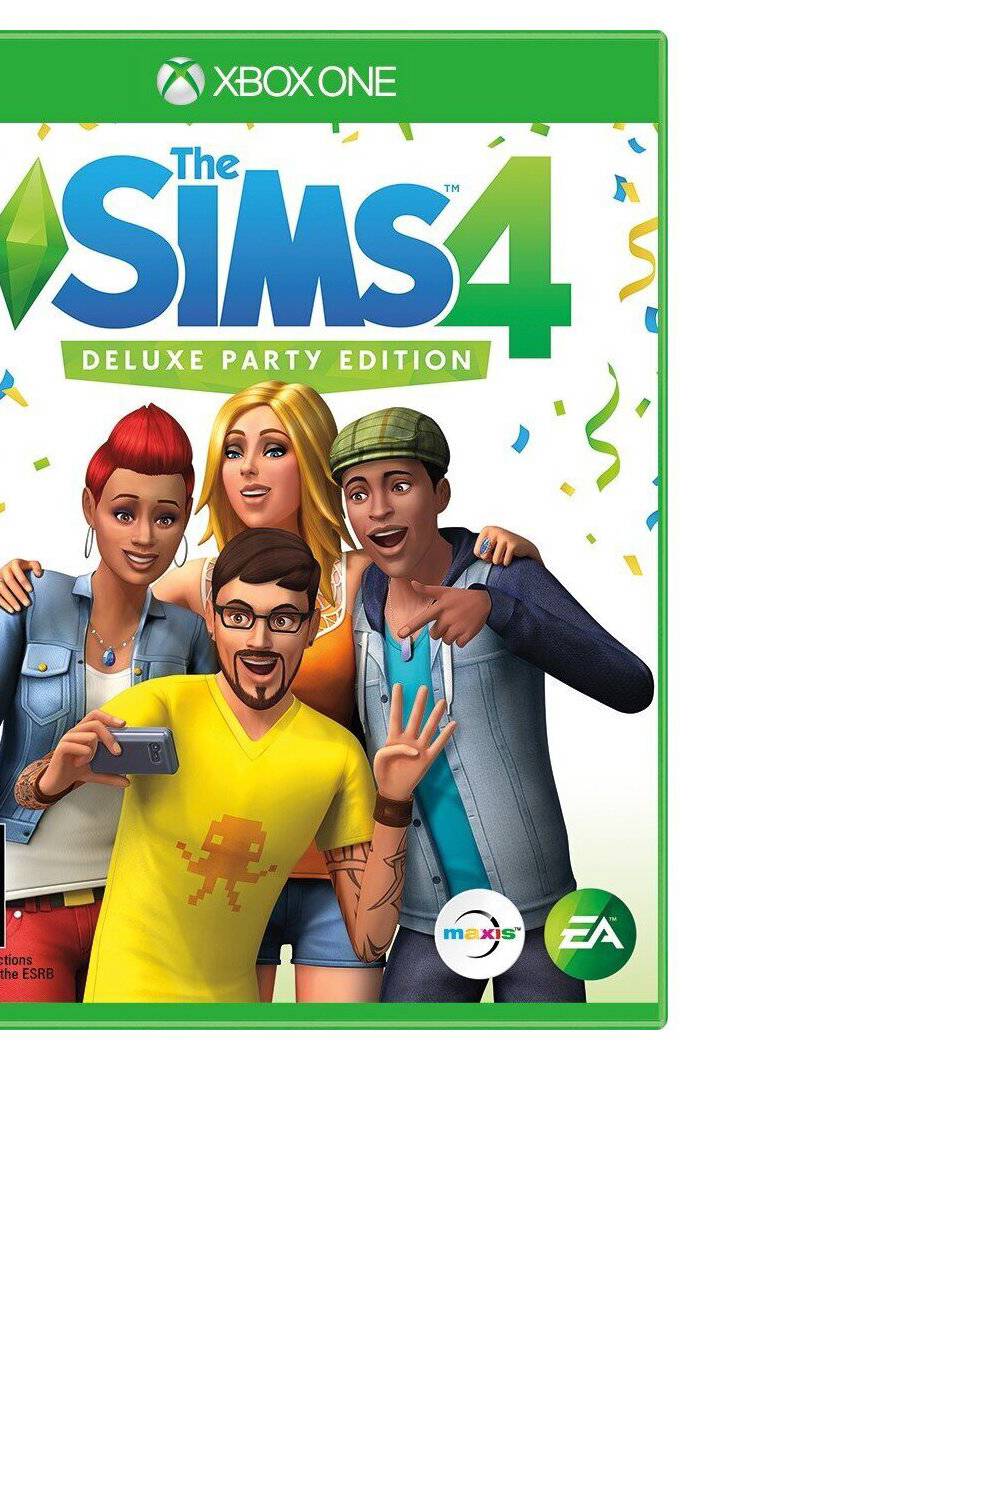 ELECTRONIC ARTS - The Sims 4 Xbox One